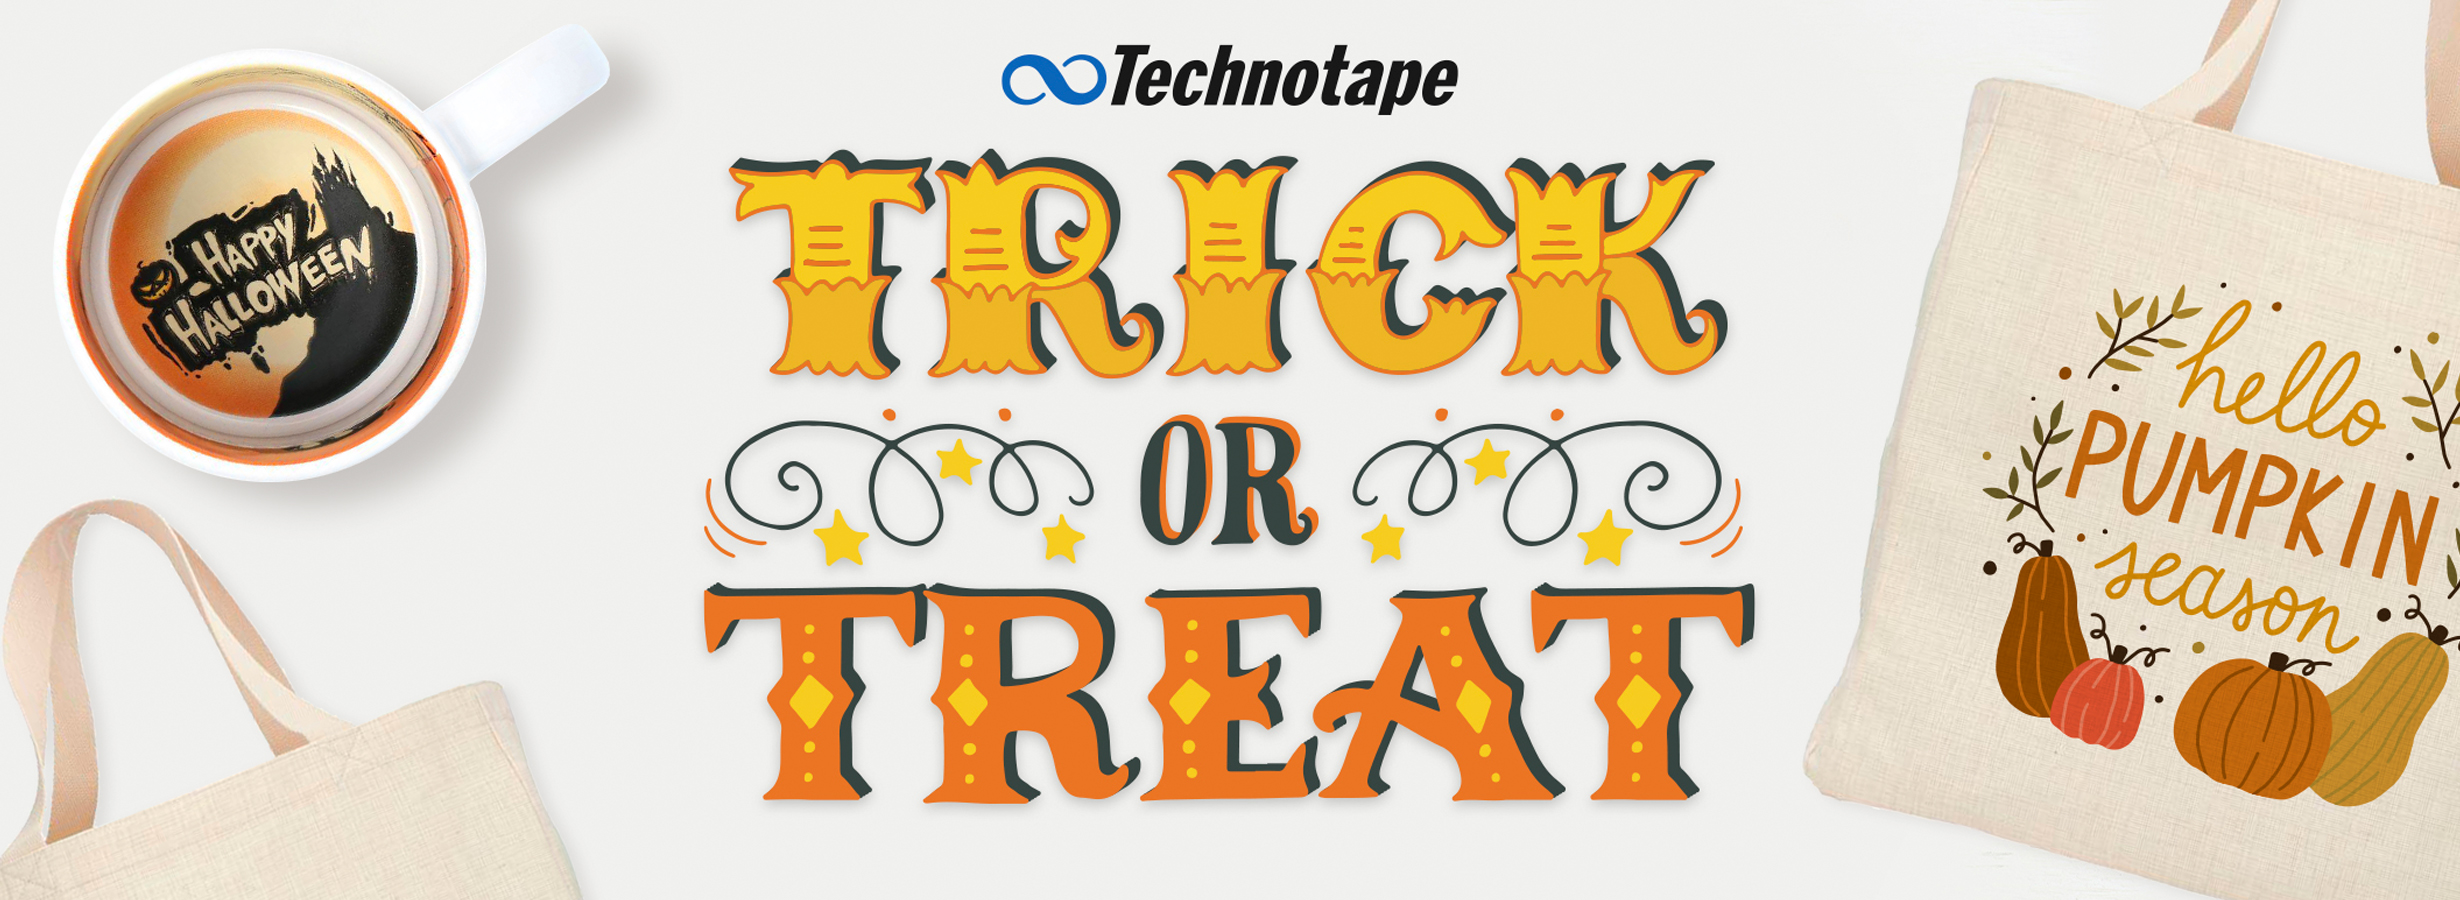 Here are some creative tips to get your Halloween party started with fun sublimation products!